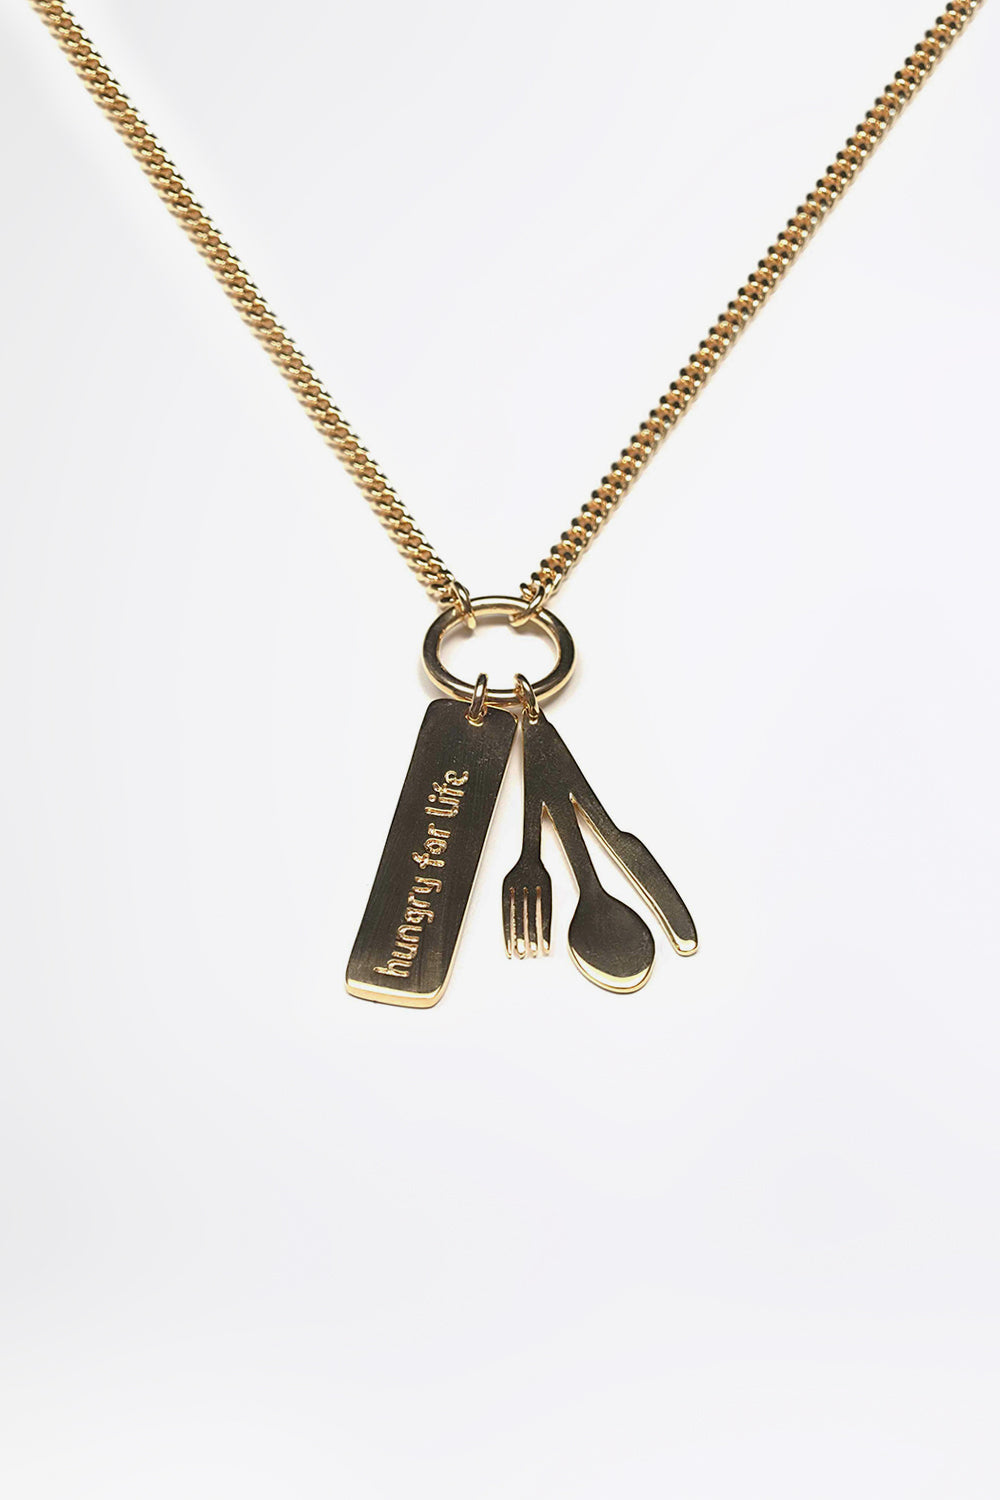 HUNGRY FOR LIFE - Fine Gold Necklace